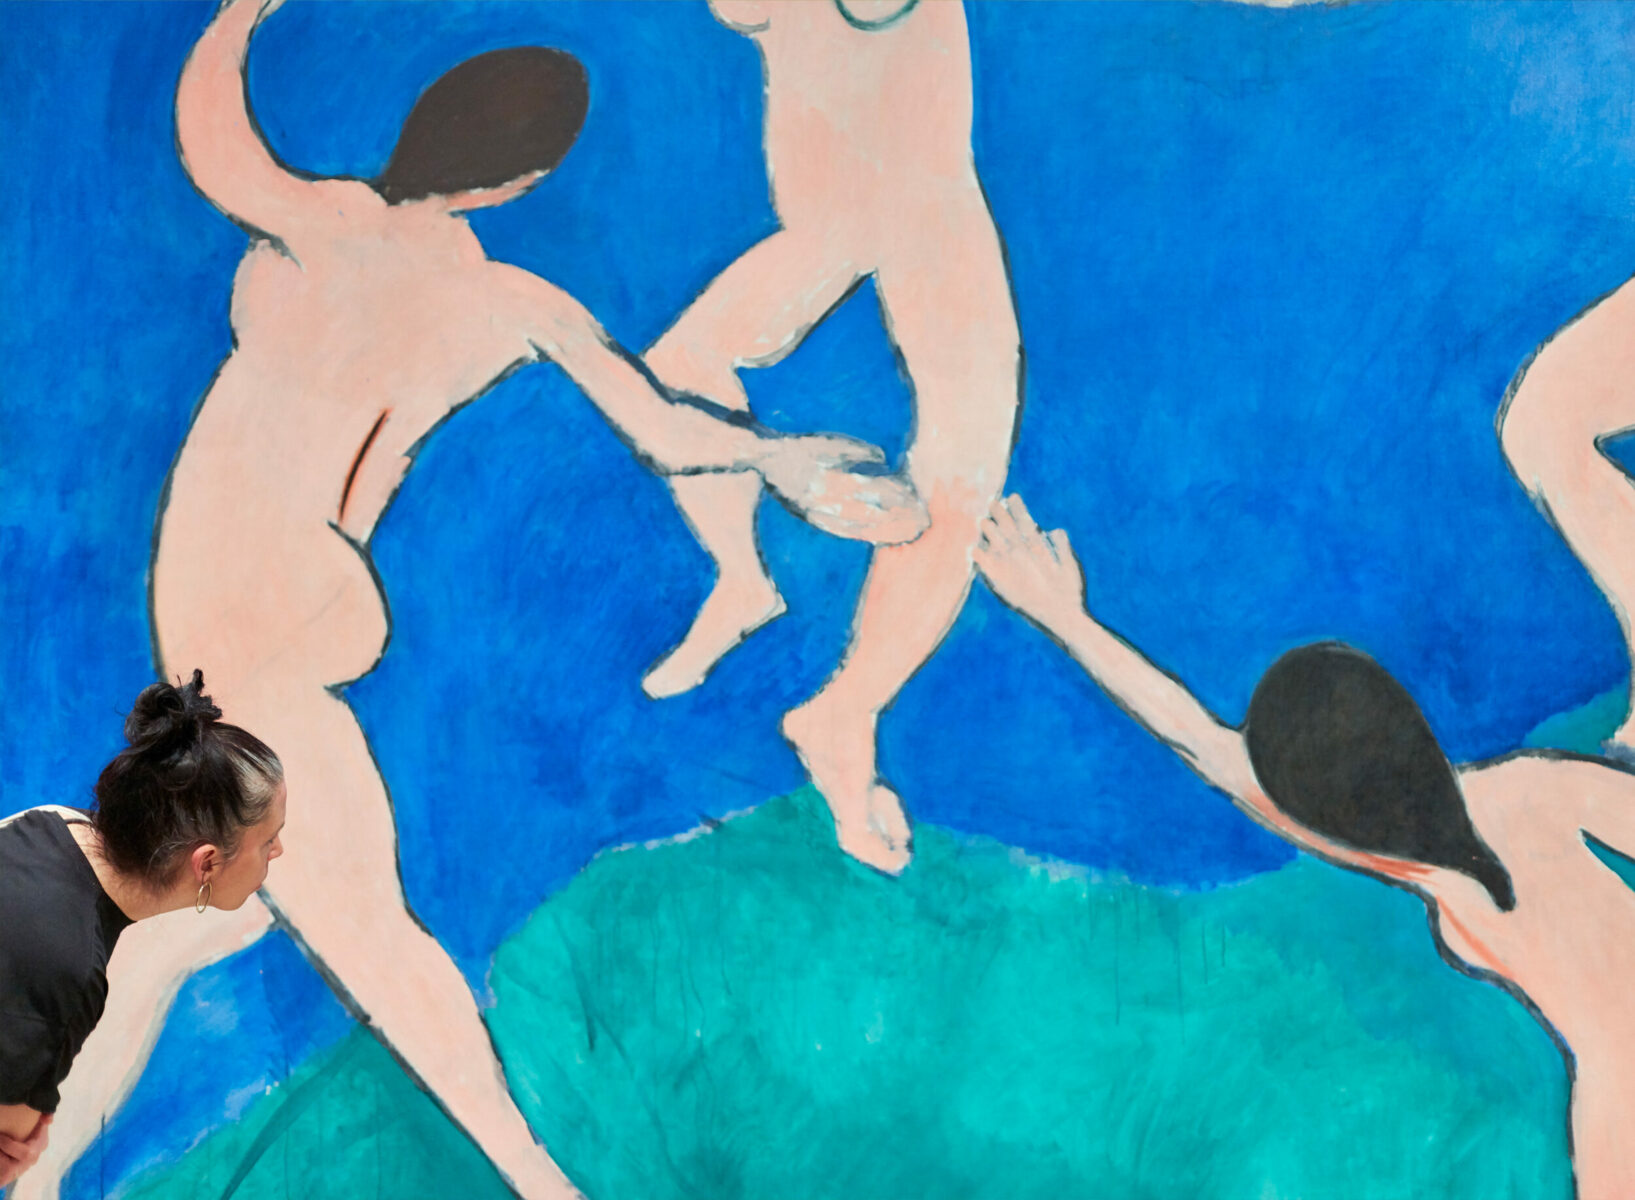 A viewer in front of Henry Matisse's painting "Dance (I)". The artwork shows multiple naked figures dancing in a green and blue background.
